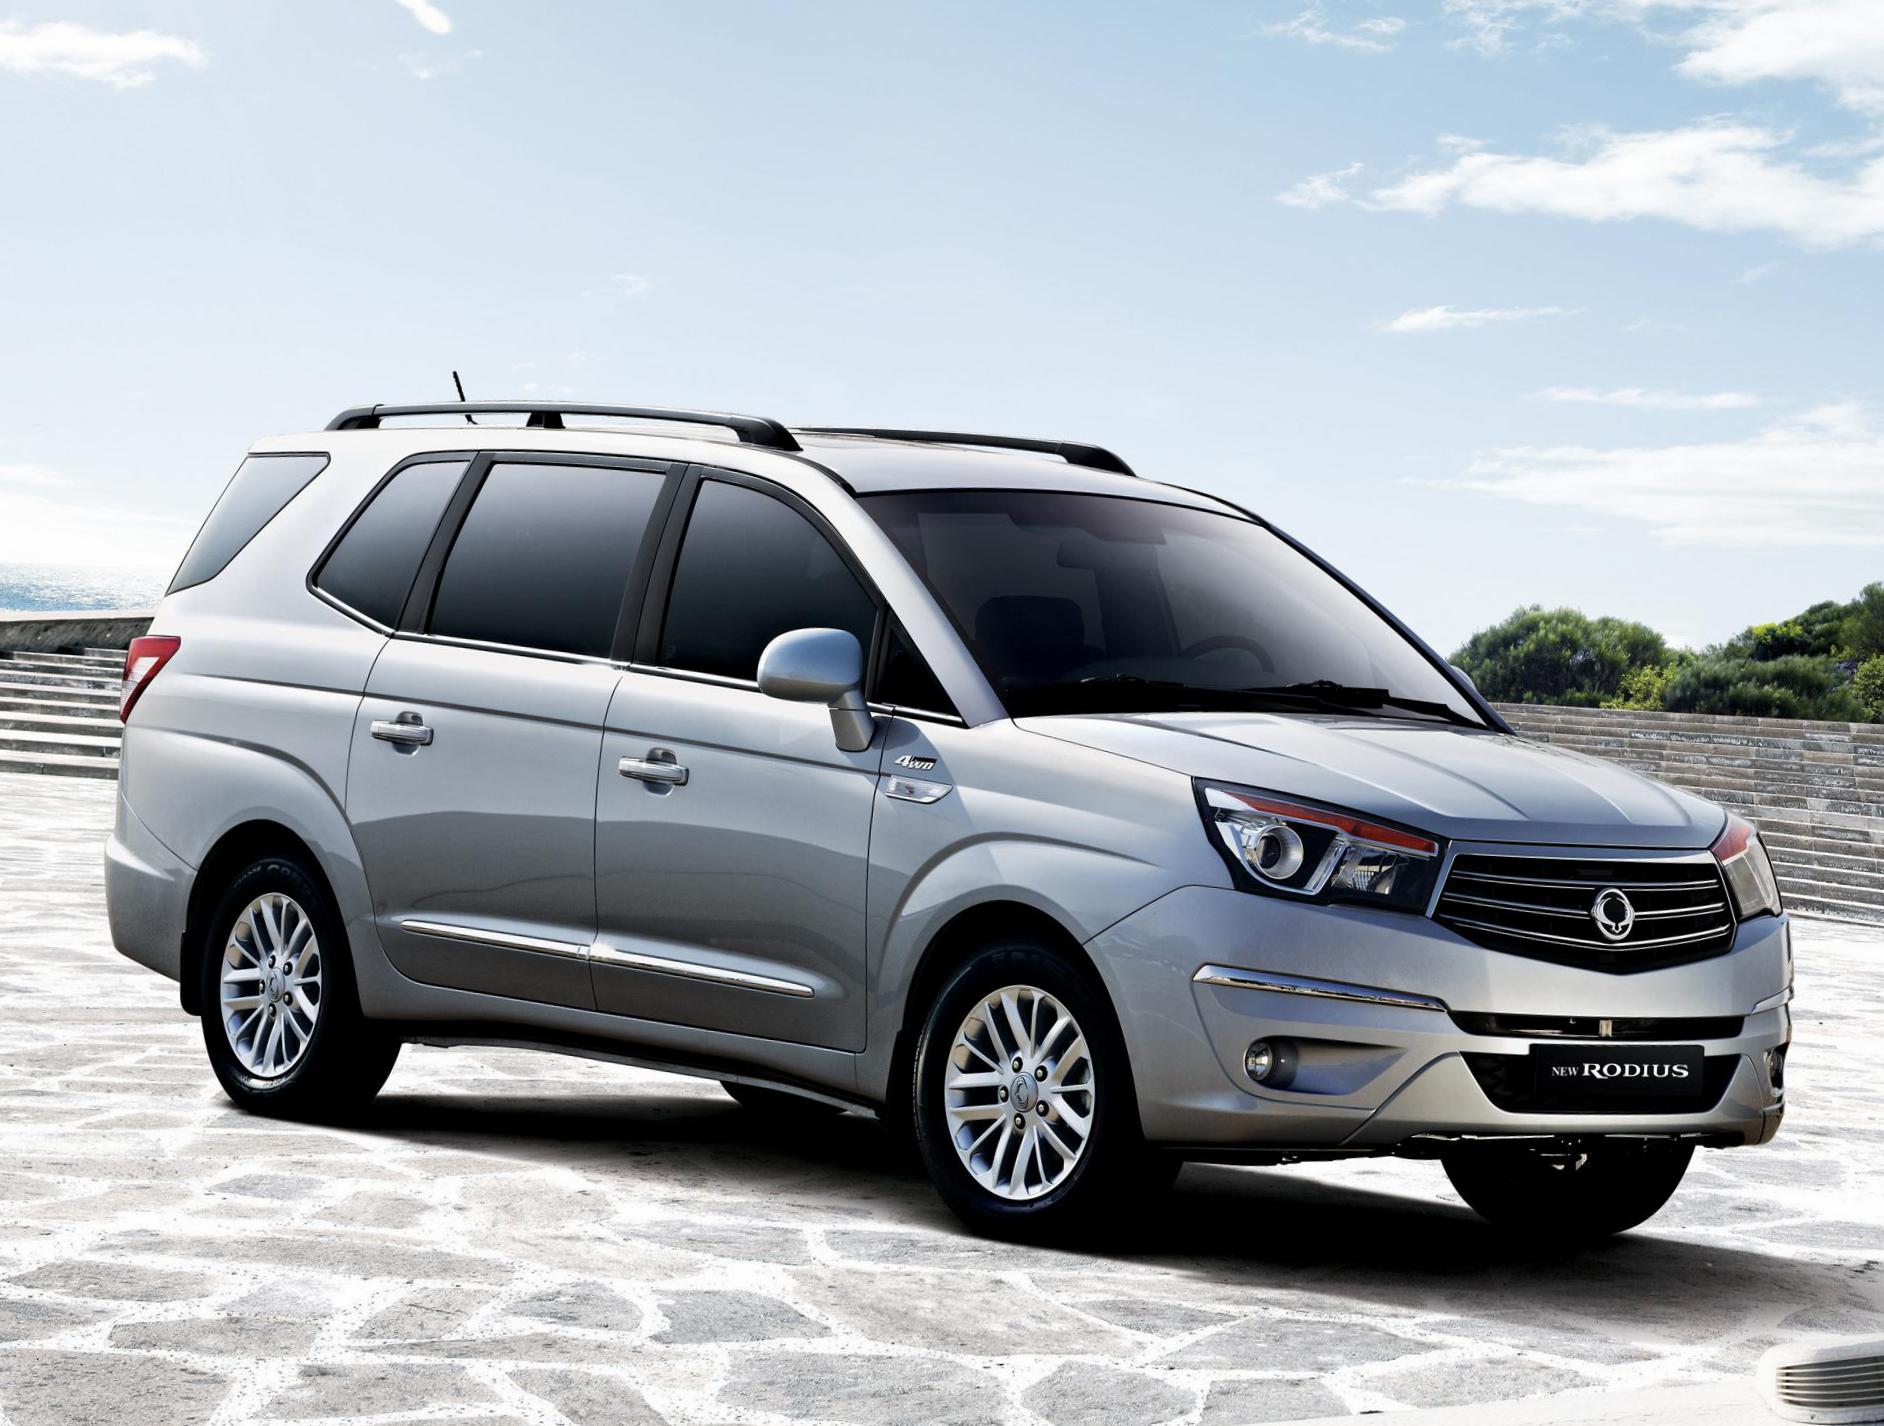 SsangYong Rodius Specifications sedan